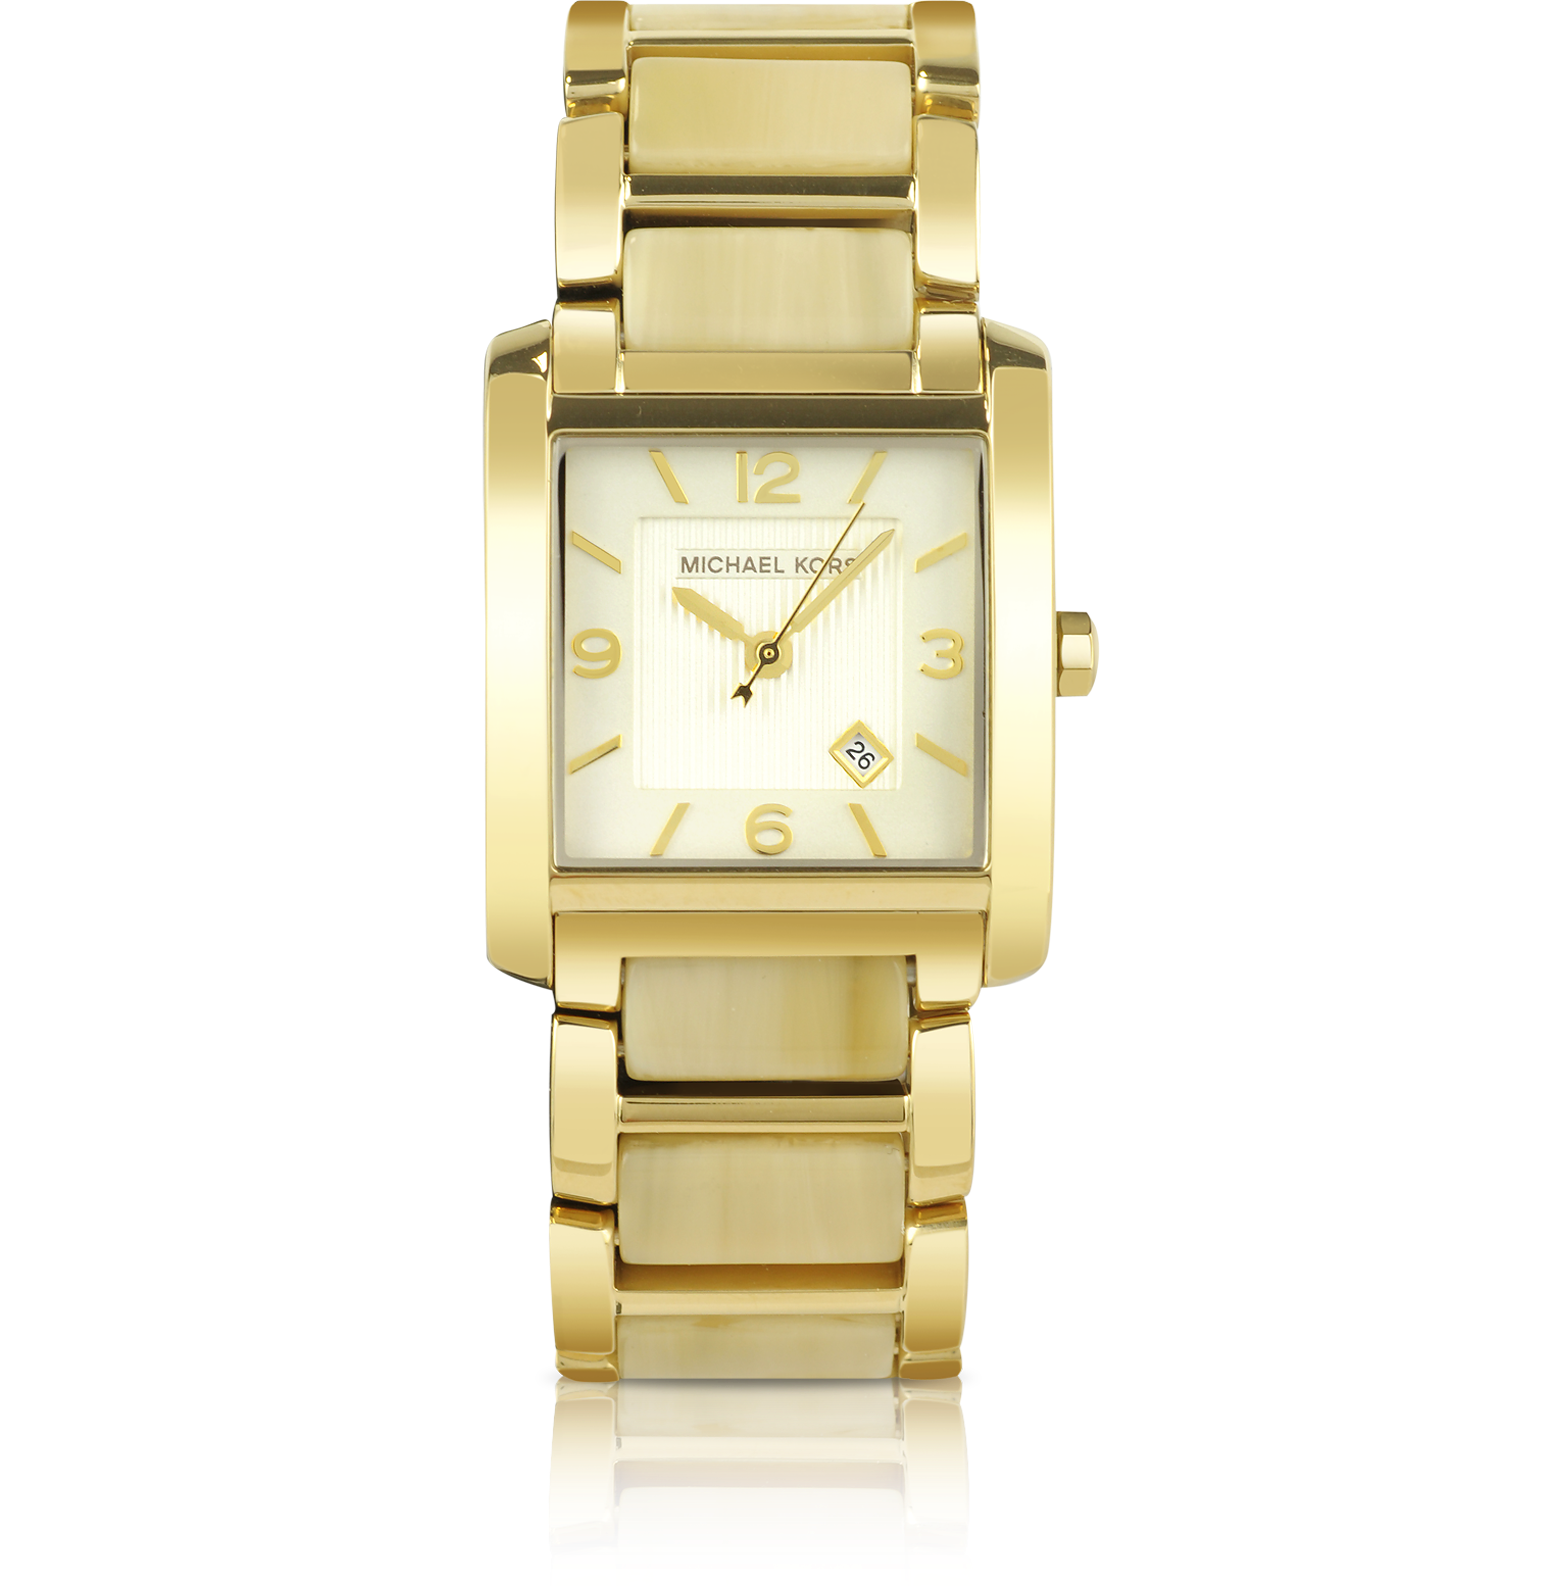 Michael Kors Square Case Watch at FORZIERI